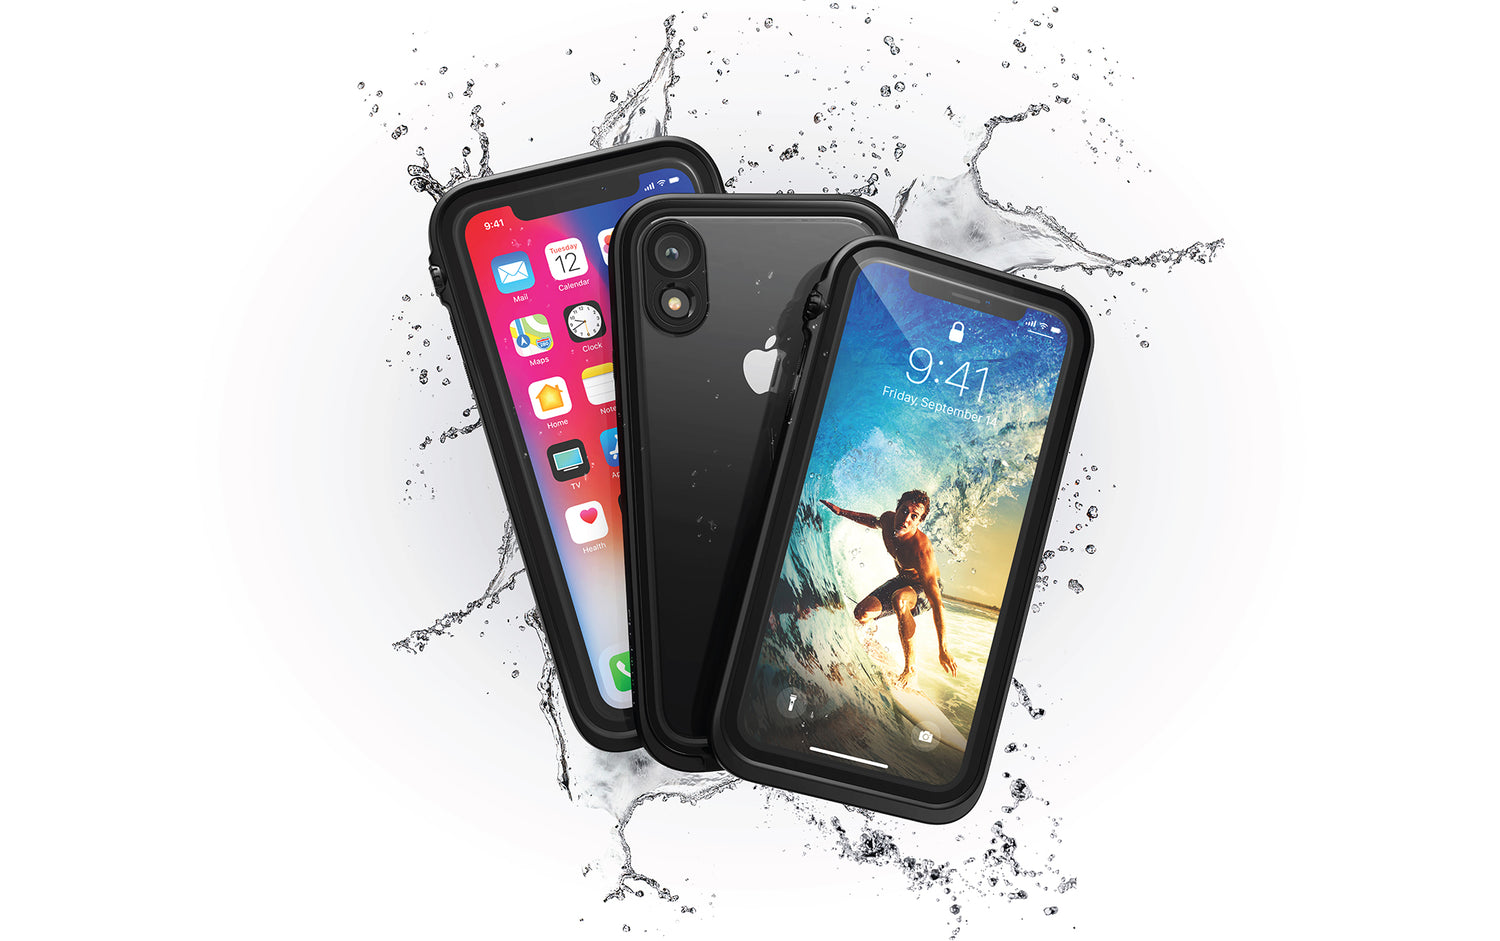 CATALYST LAUNCHES WATERPROOF AND IMPACT PROTECTION CASES FOR NEW IPHONE Xs, XR AND Xs MAX AT PEPCOM HOLIDAY SPECTACULAR IN NEW YORK